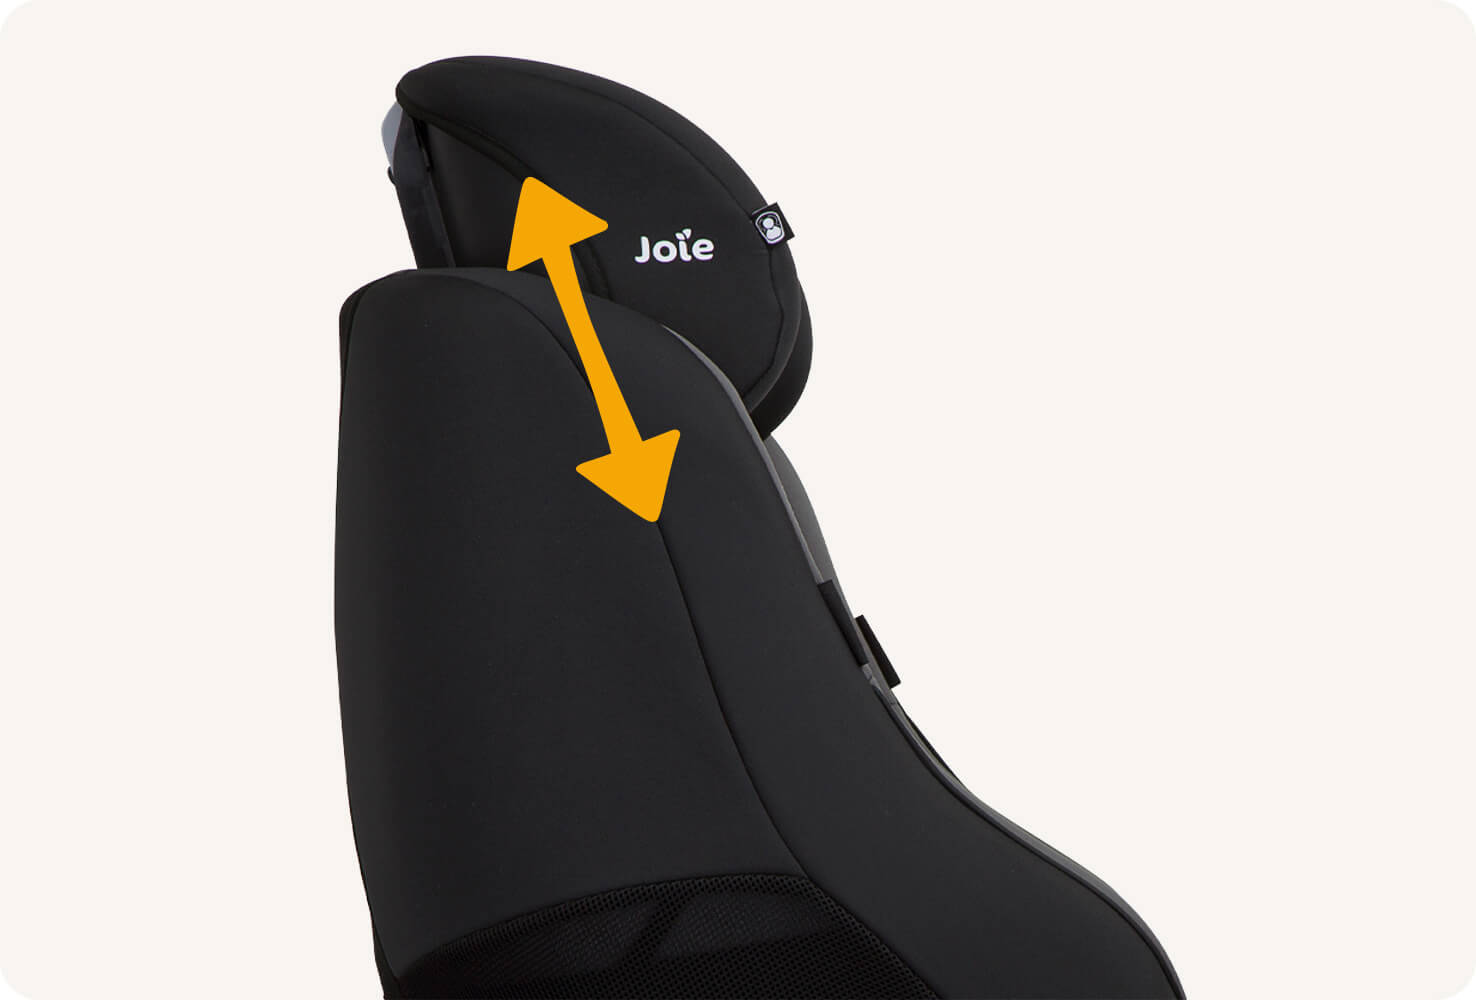  Joie spin 360 car seat in gray and black close up of headrest with arrow pointing up and down. 